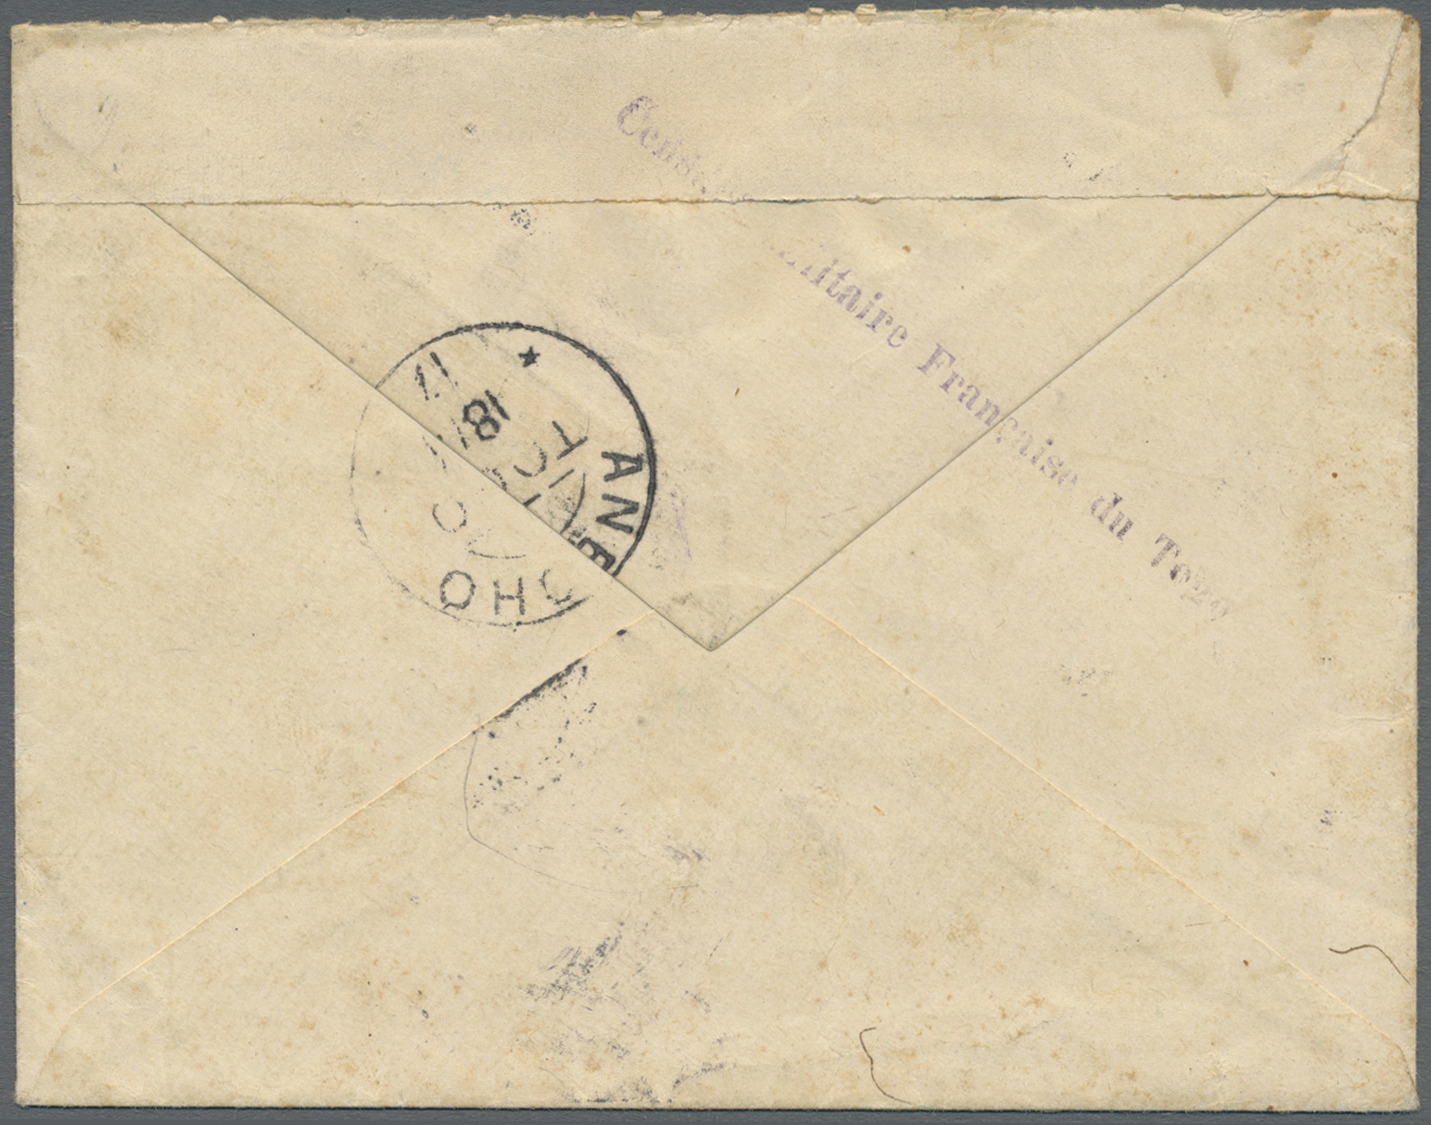 Br Dahomey - Portomarken: 1914, Due Stamps 5 C And 15 C Canc. "ANECHO TOGO 19/4 17" On Unfranked Cover Sent From "LOME 1 - Other & Unclassified